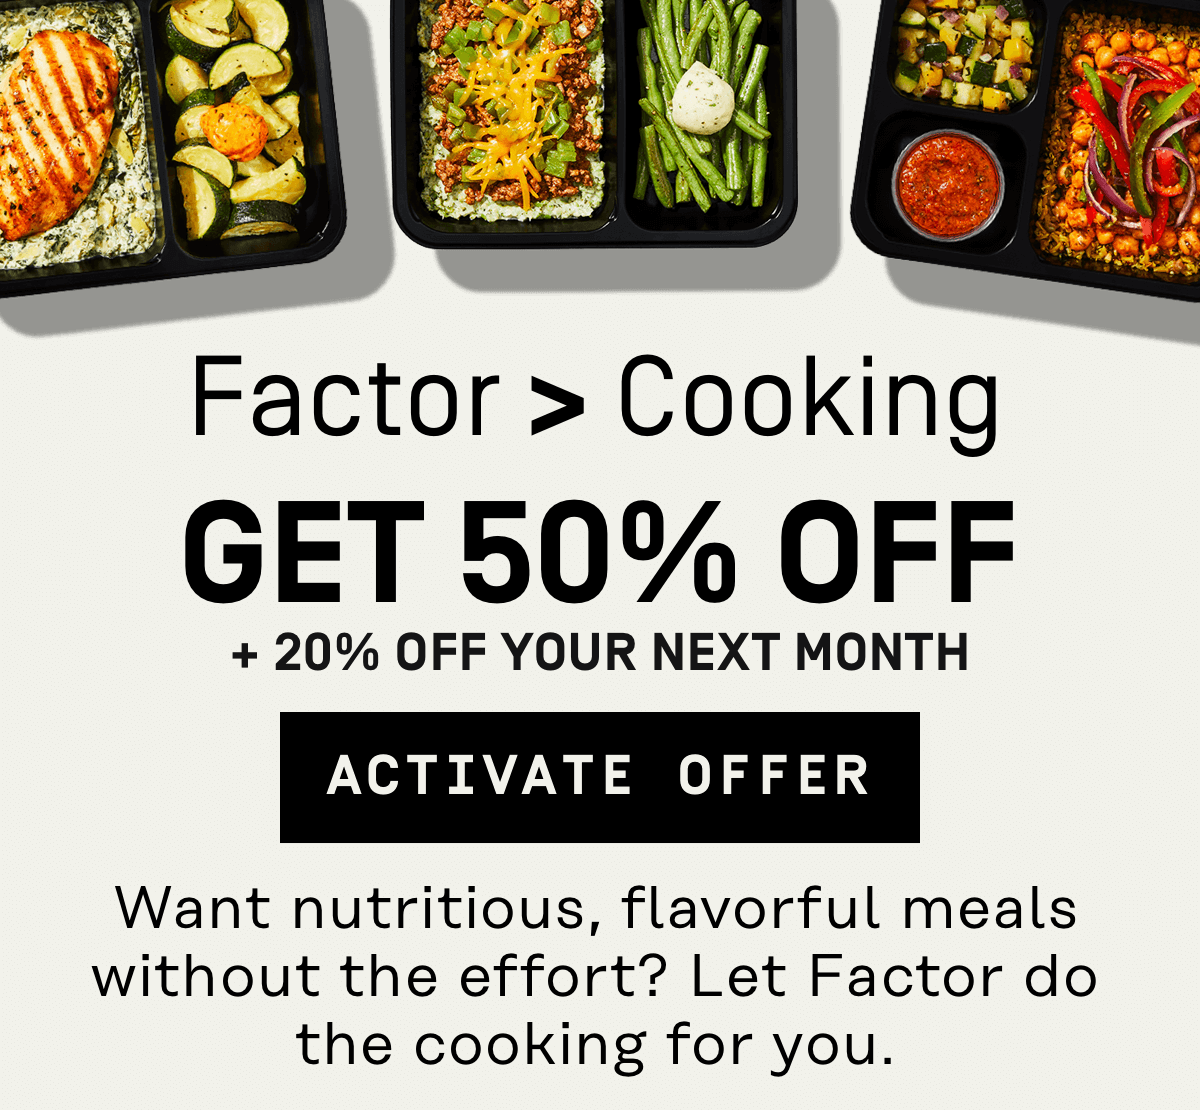 Factor > Cooking | Get 50% Off + 20% Off your next month --> Activate Offer 